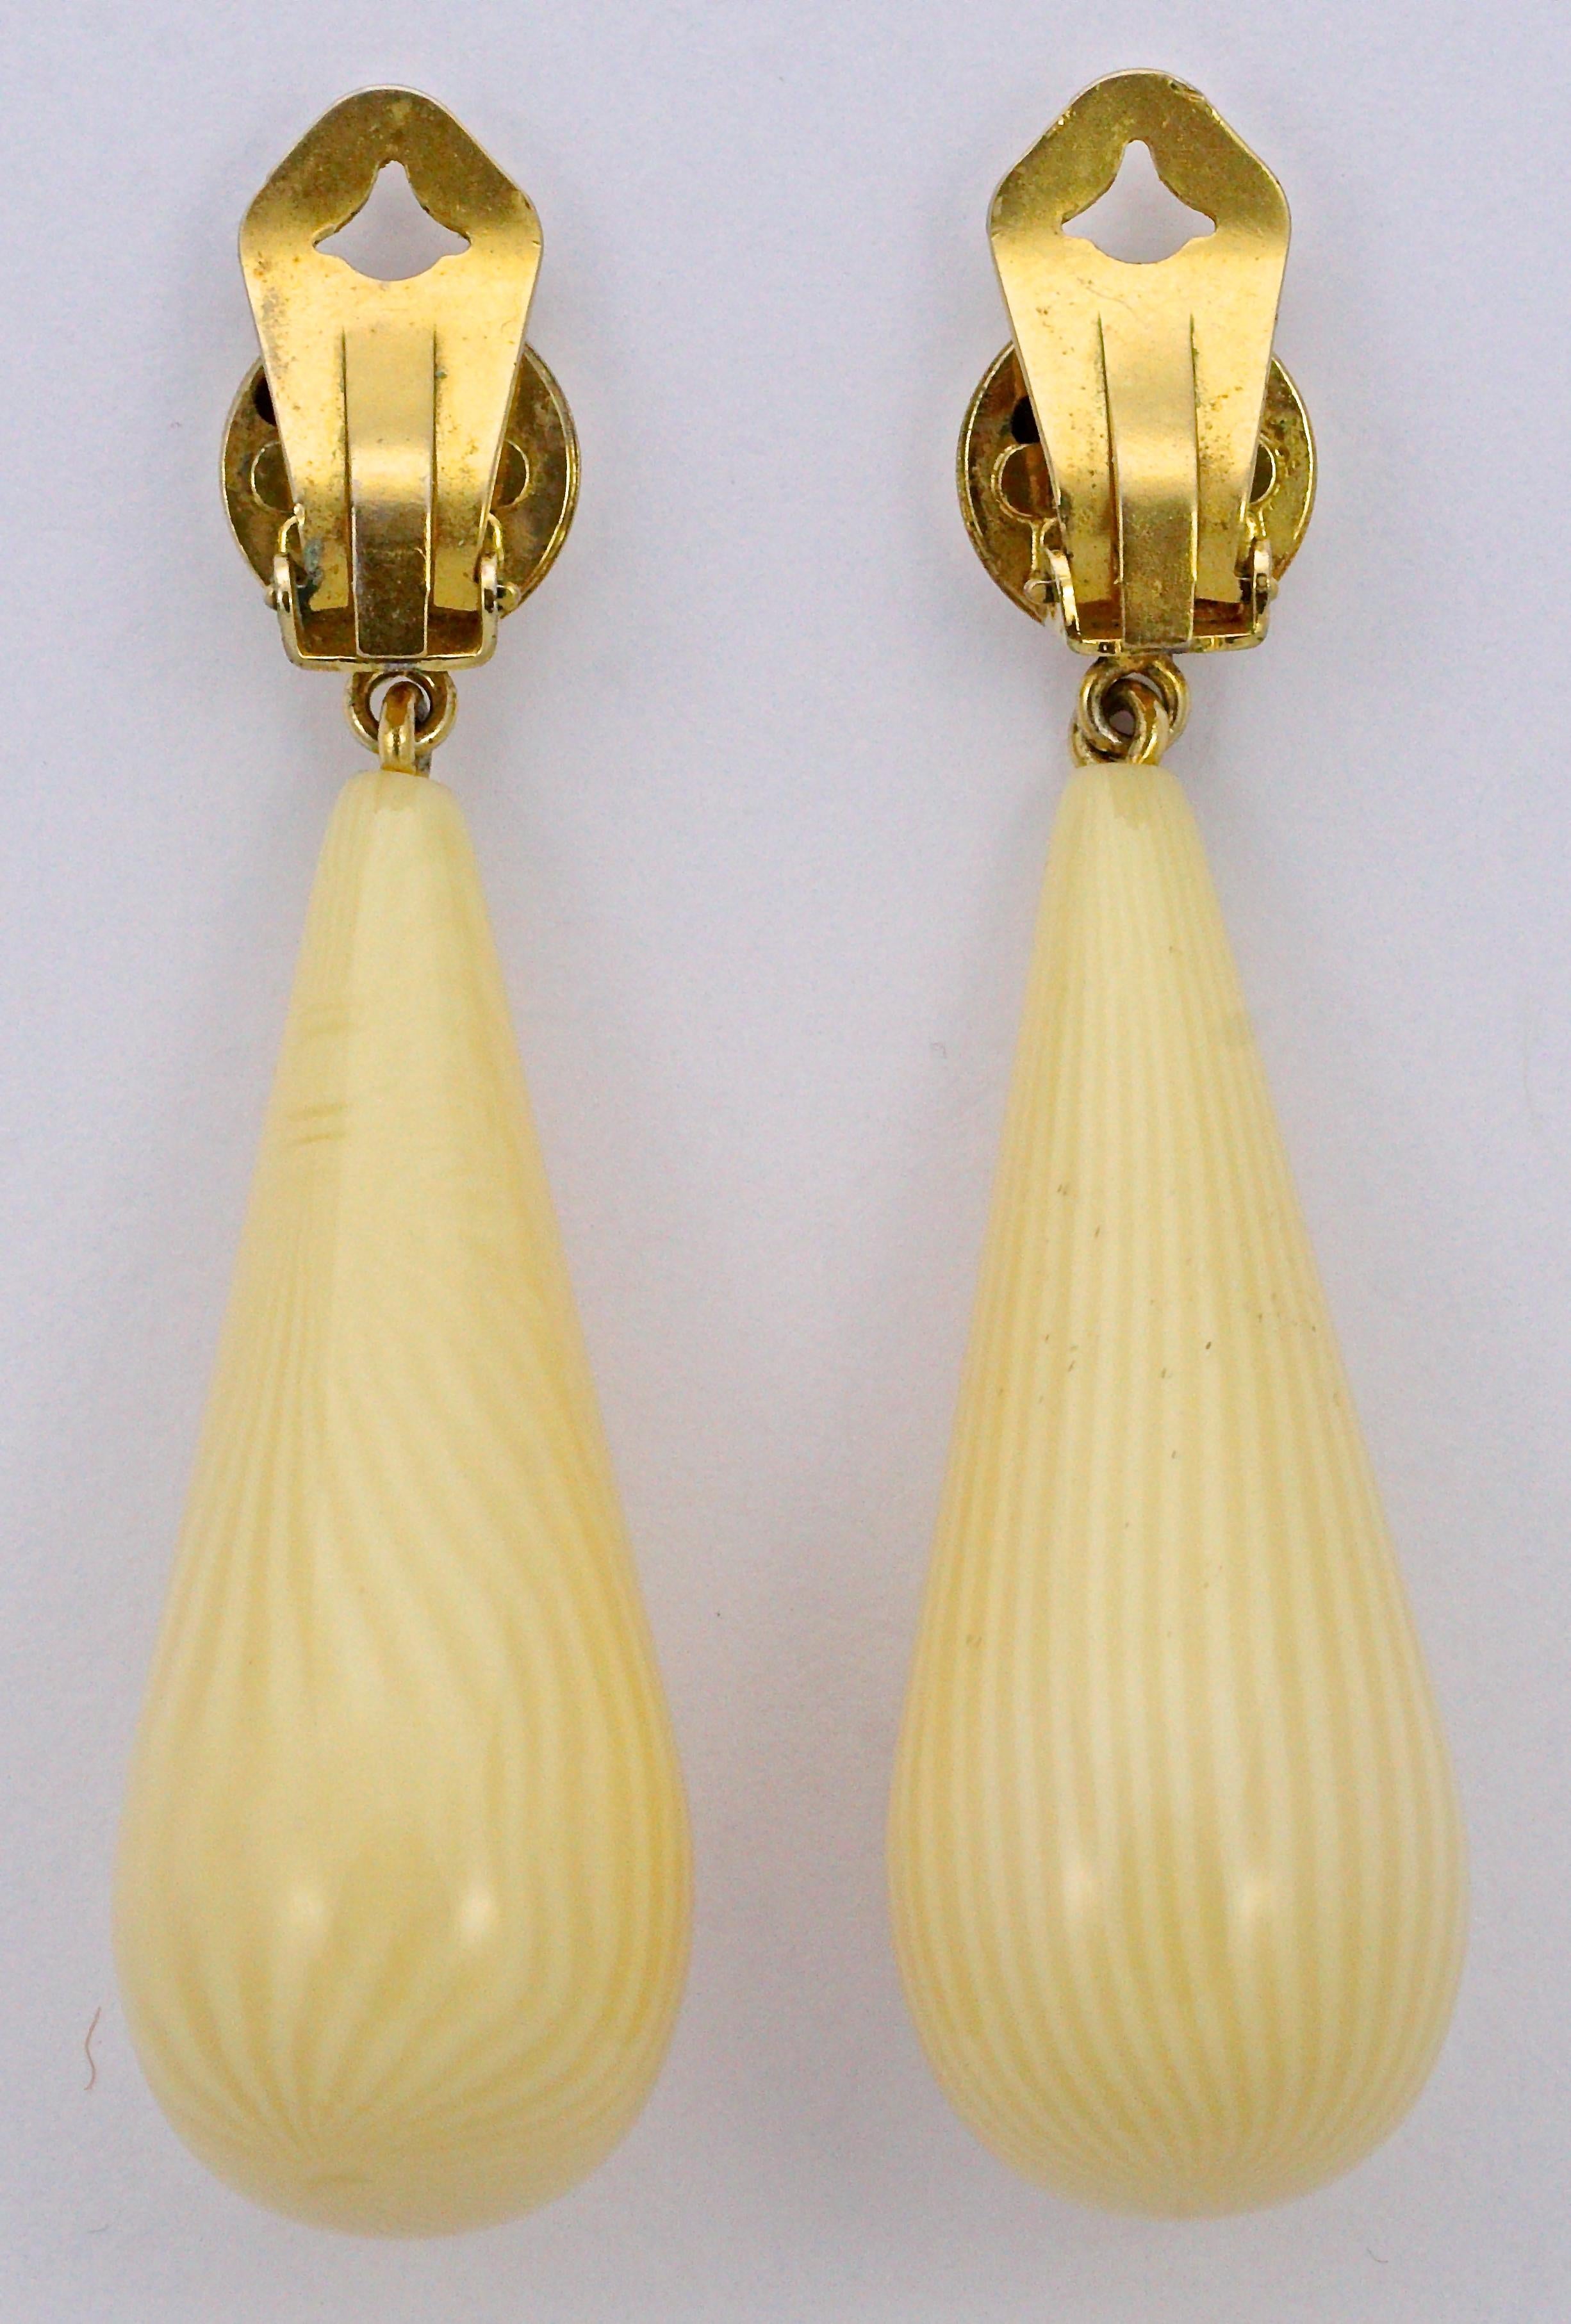 Beautiful vintage Pellini clip on gold tone earrings, featuring long striated cream resin tear drops. They are in very good condition, with a few marks. Measuring length 6.7cm / 2.64 inches.

This is a quality pair of Pellini statement earrings,